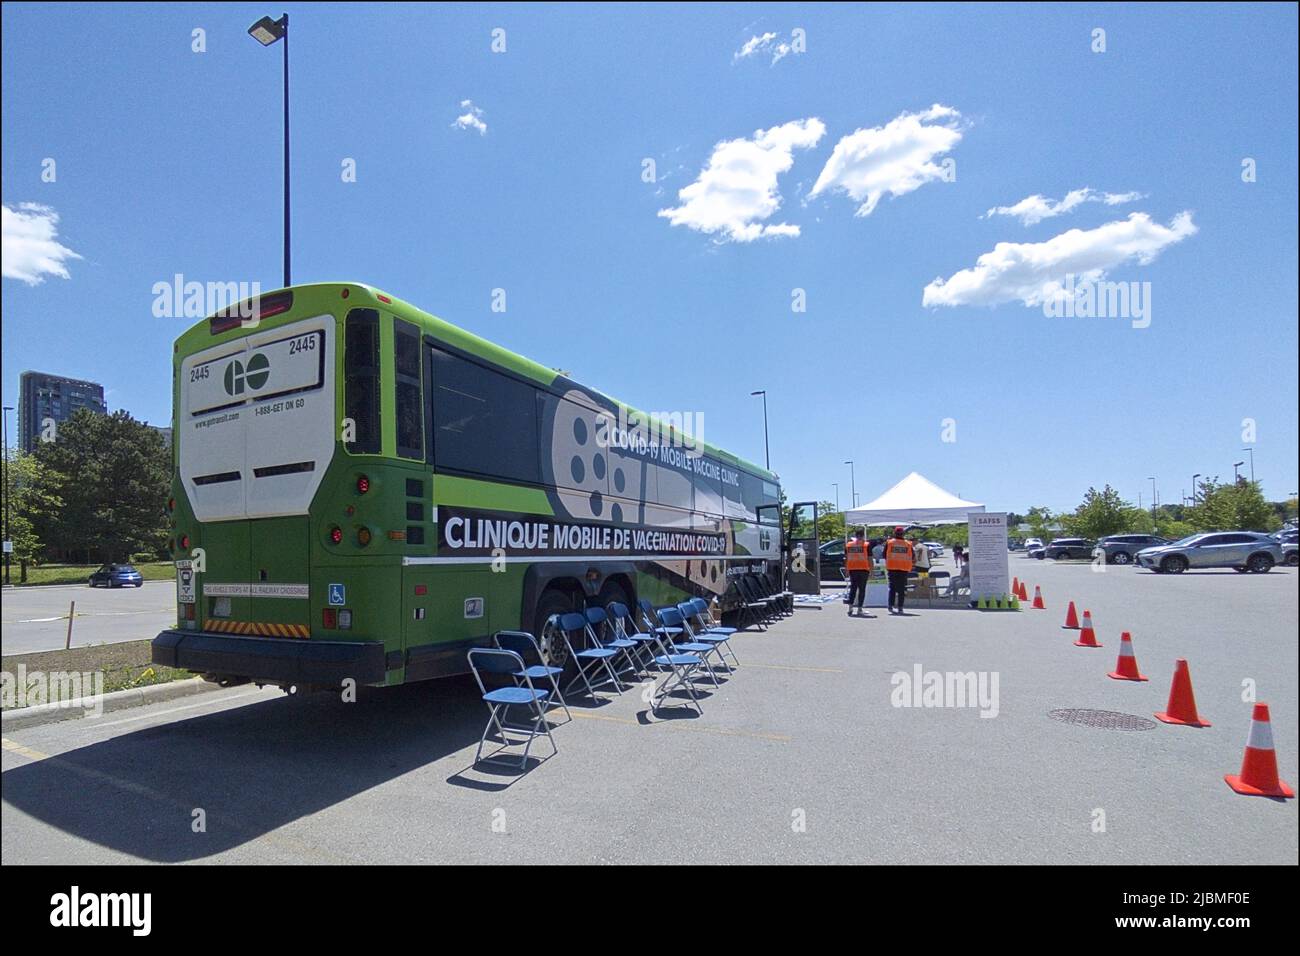 Toronto, Canada - 06-03-2022: Free COVID-19 vaccinations through the mobile vaccine clinic in a parking lot. Stock Photo